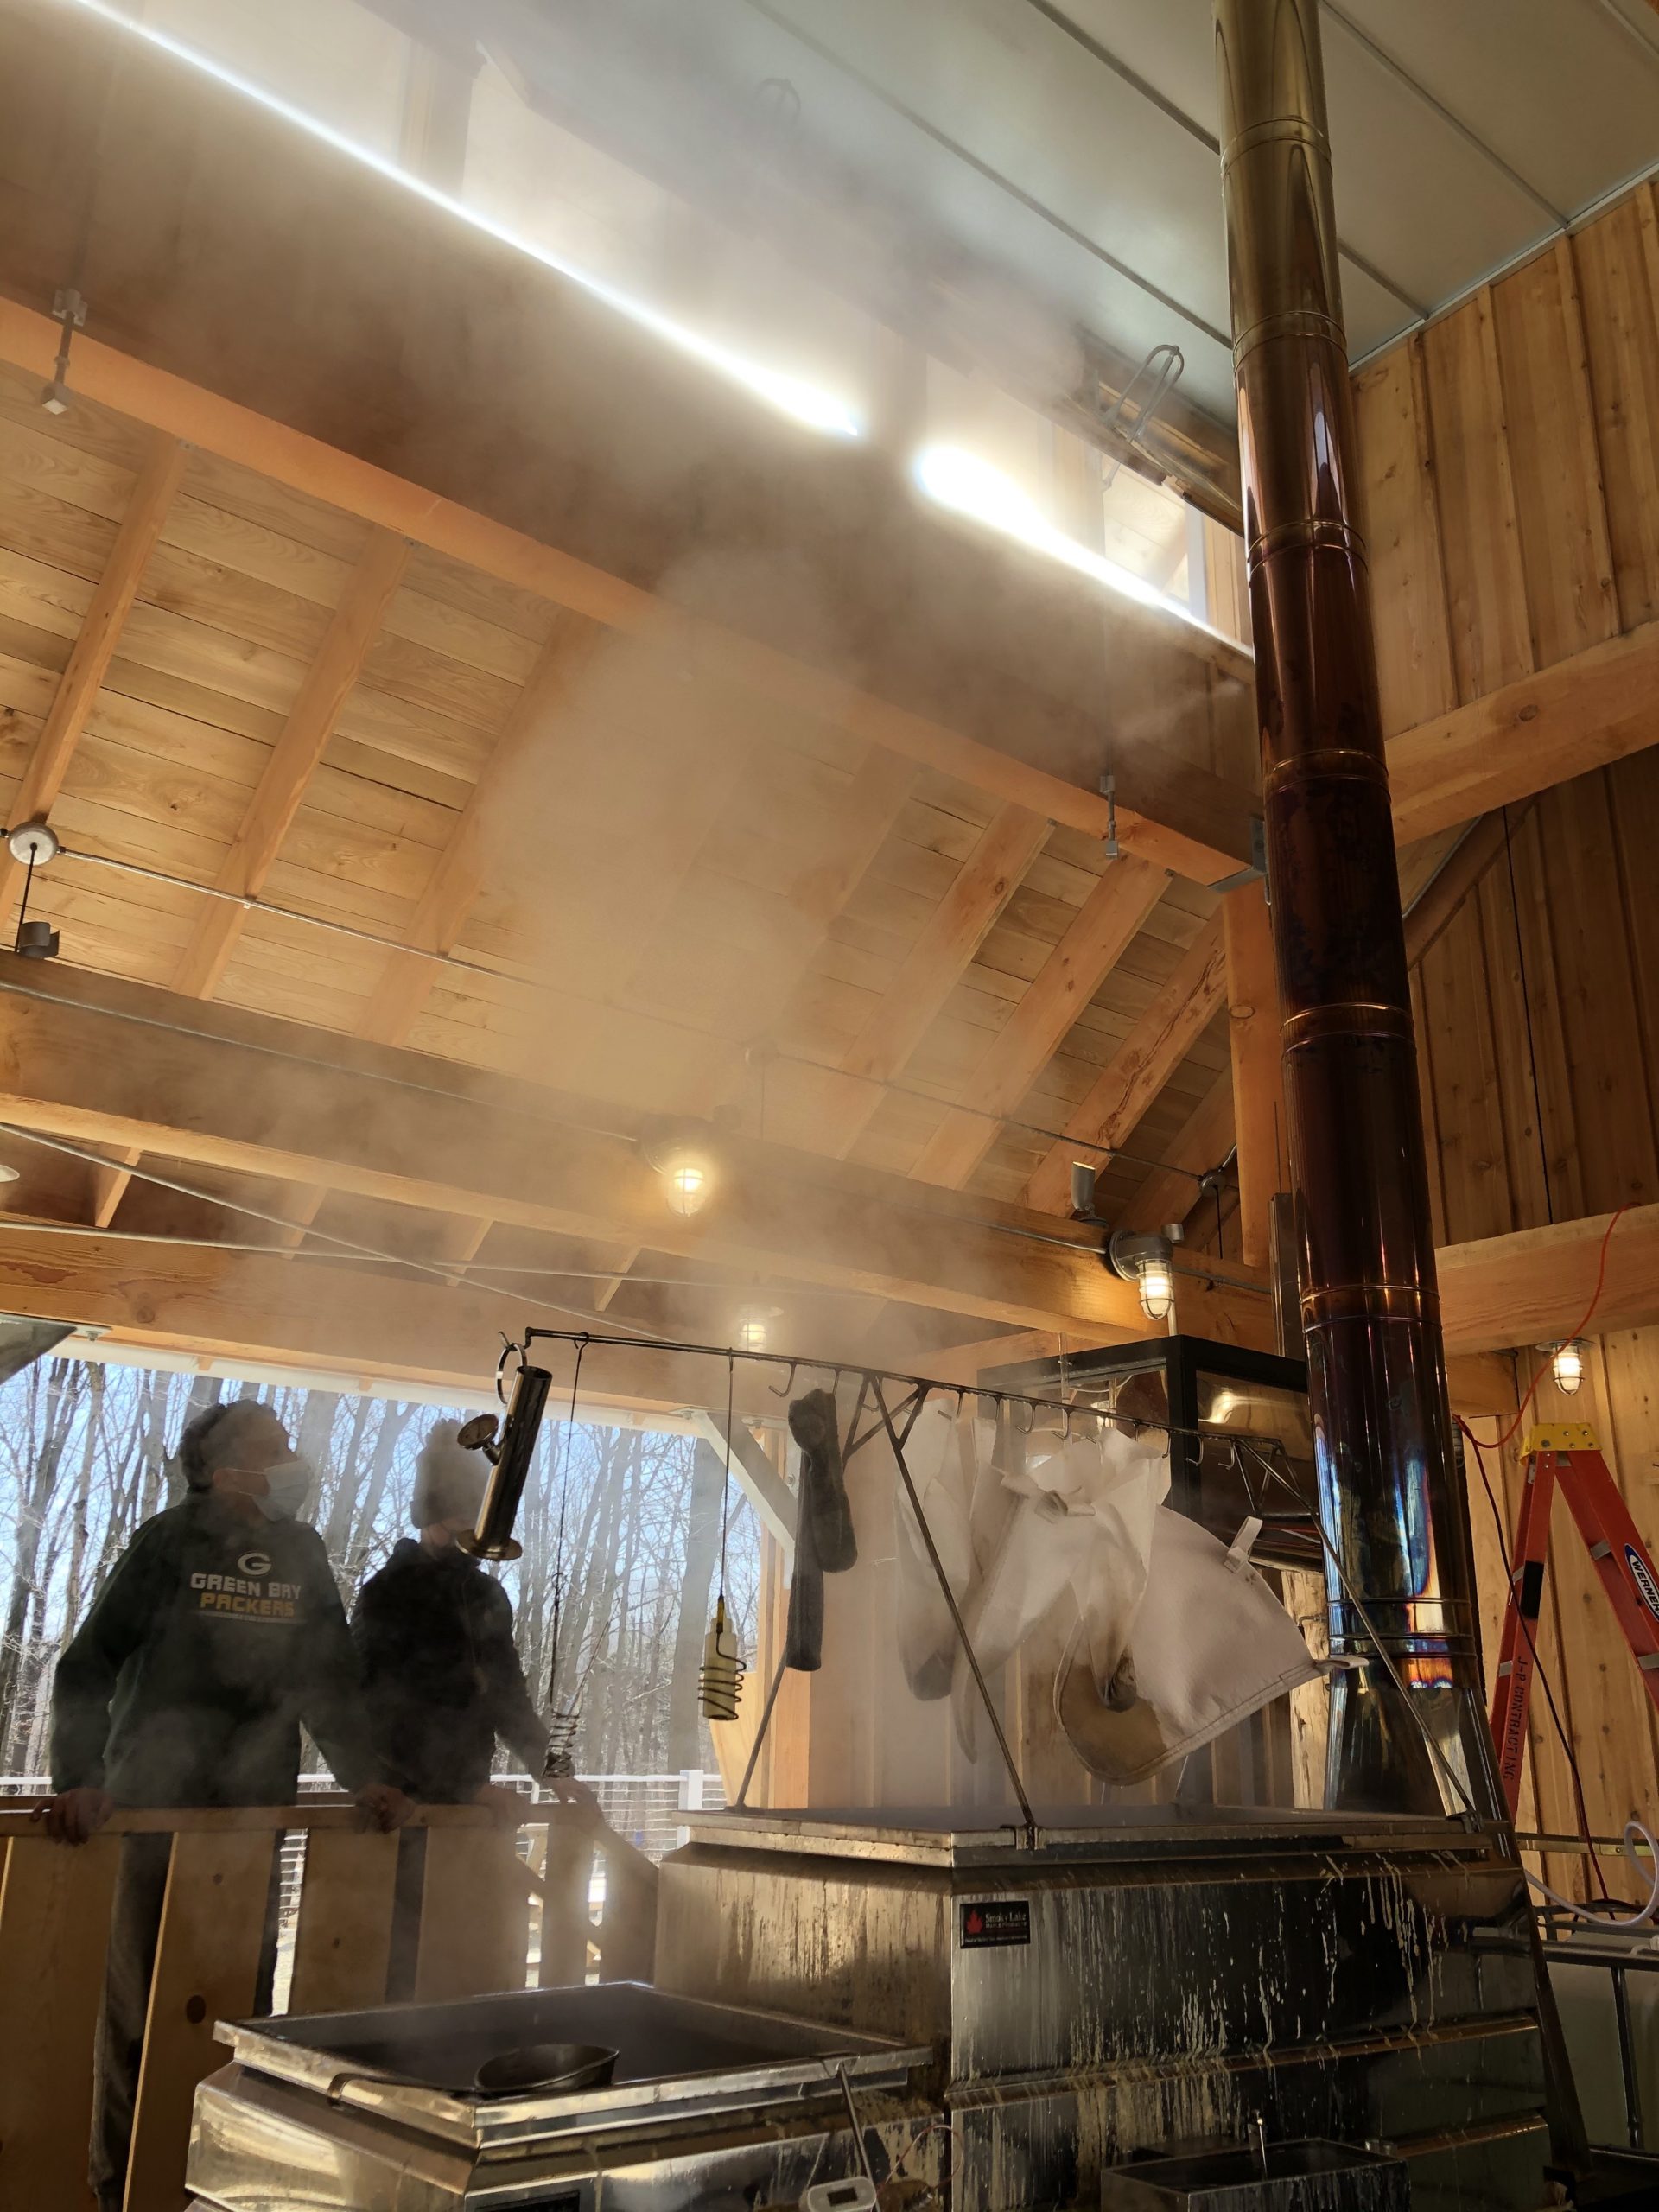 2 people in the Riveredge Sugarbush House looking at the sap boiler steaming